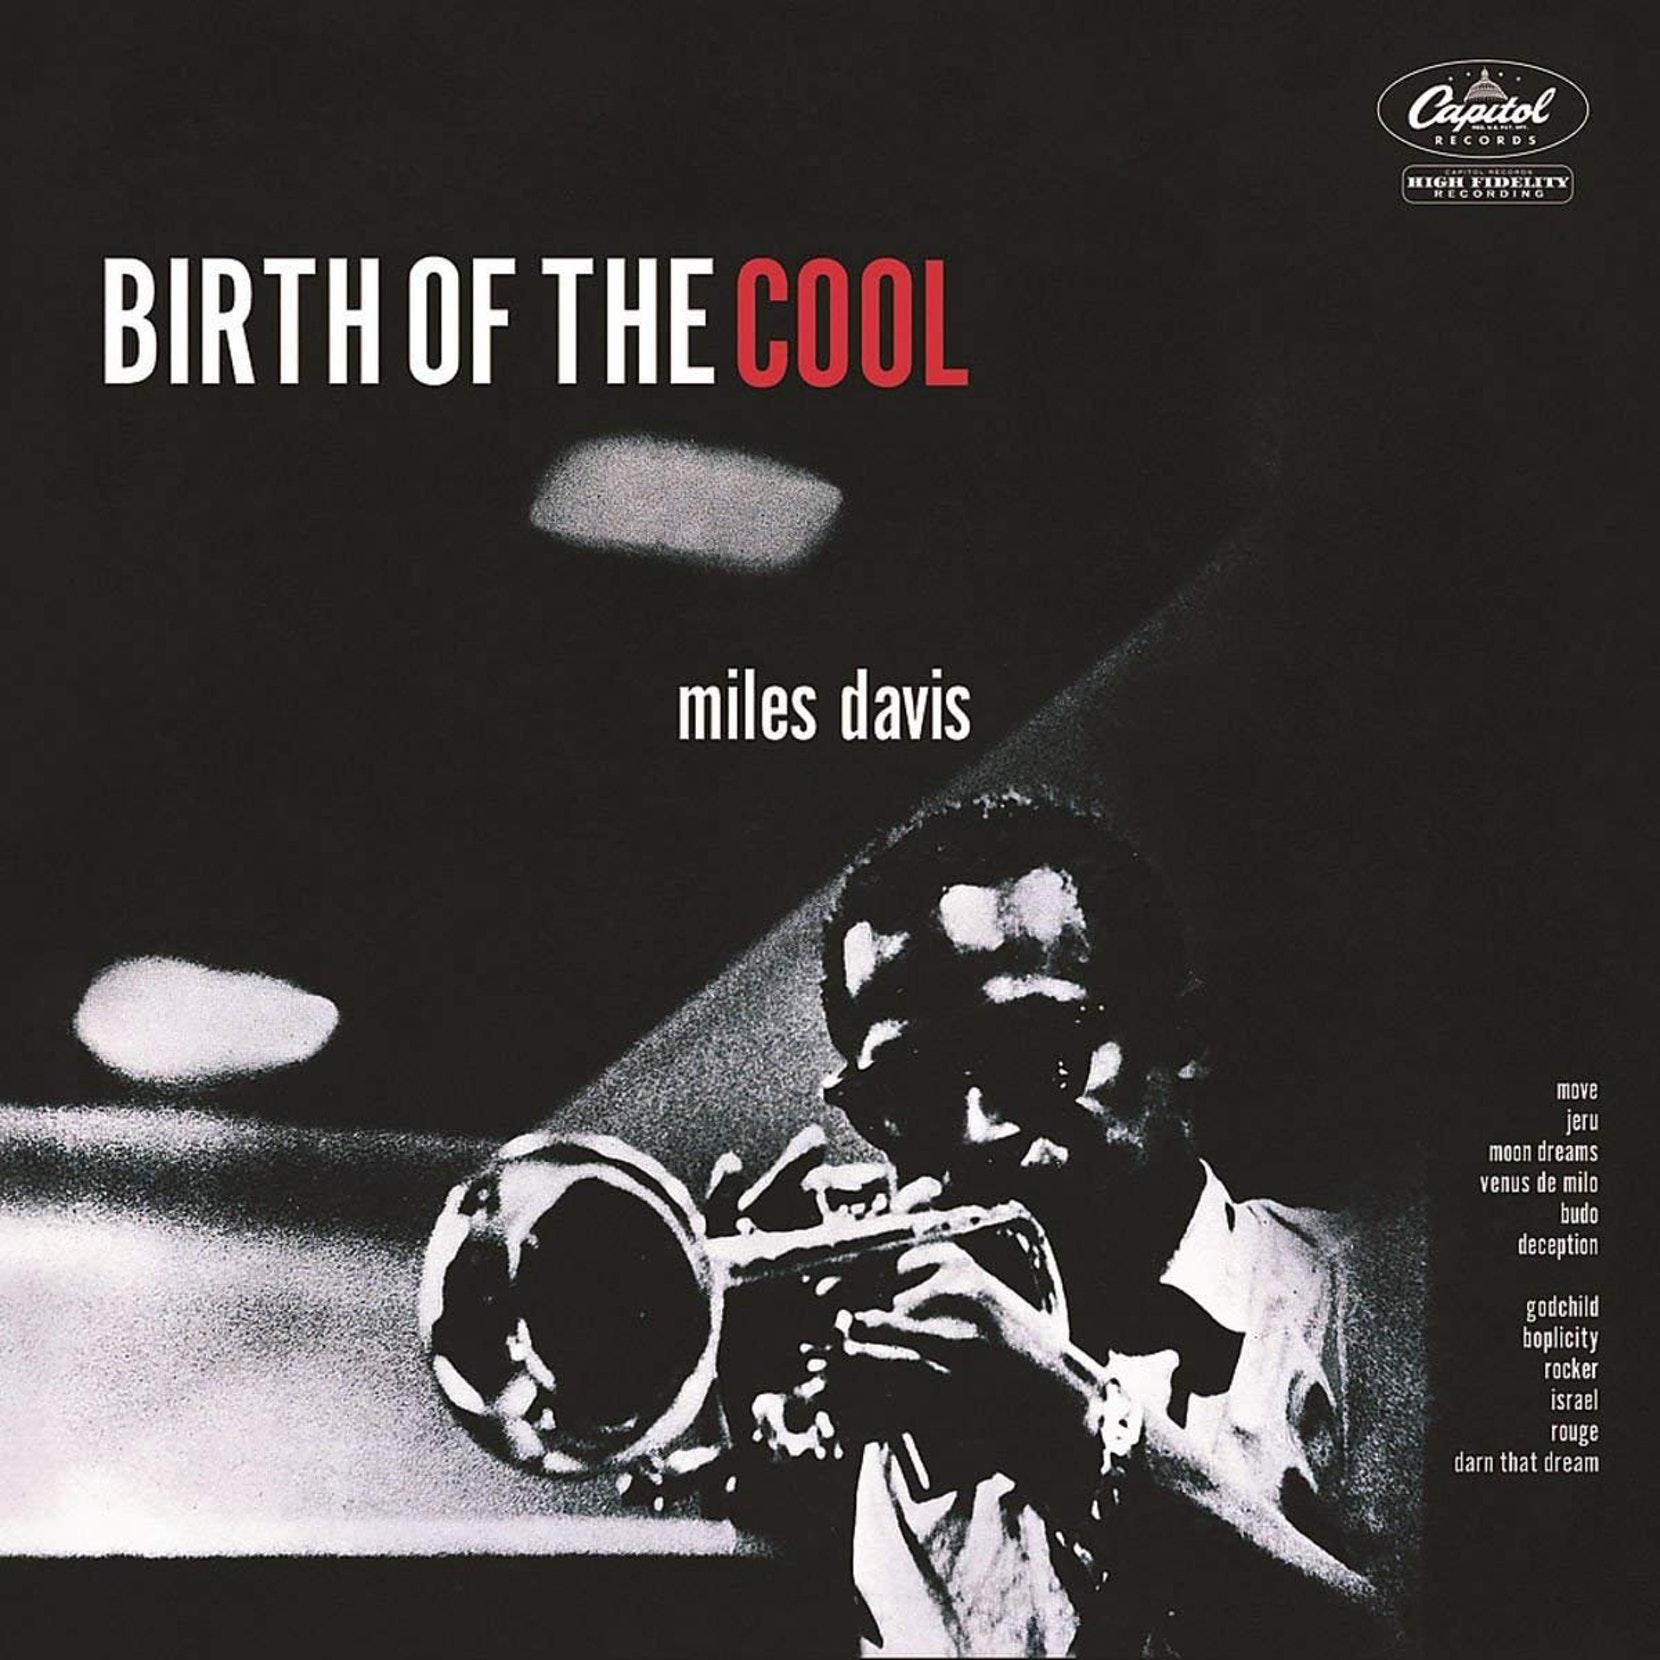 Miles Davis - The Of Complete The Birth (Vinyl) - Cool